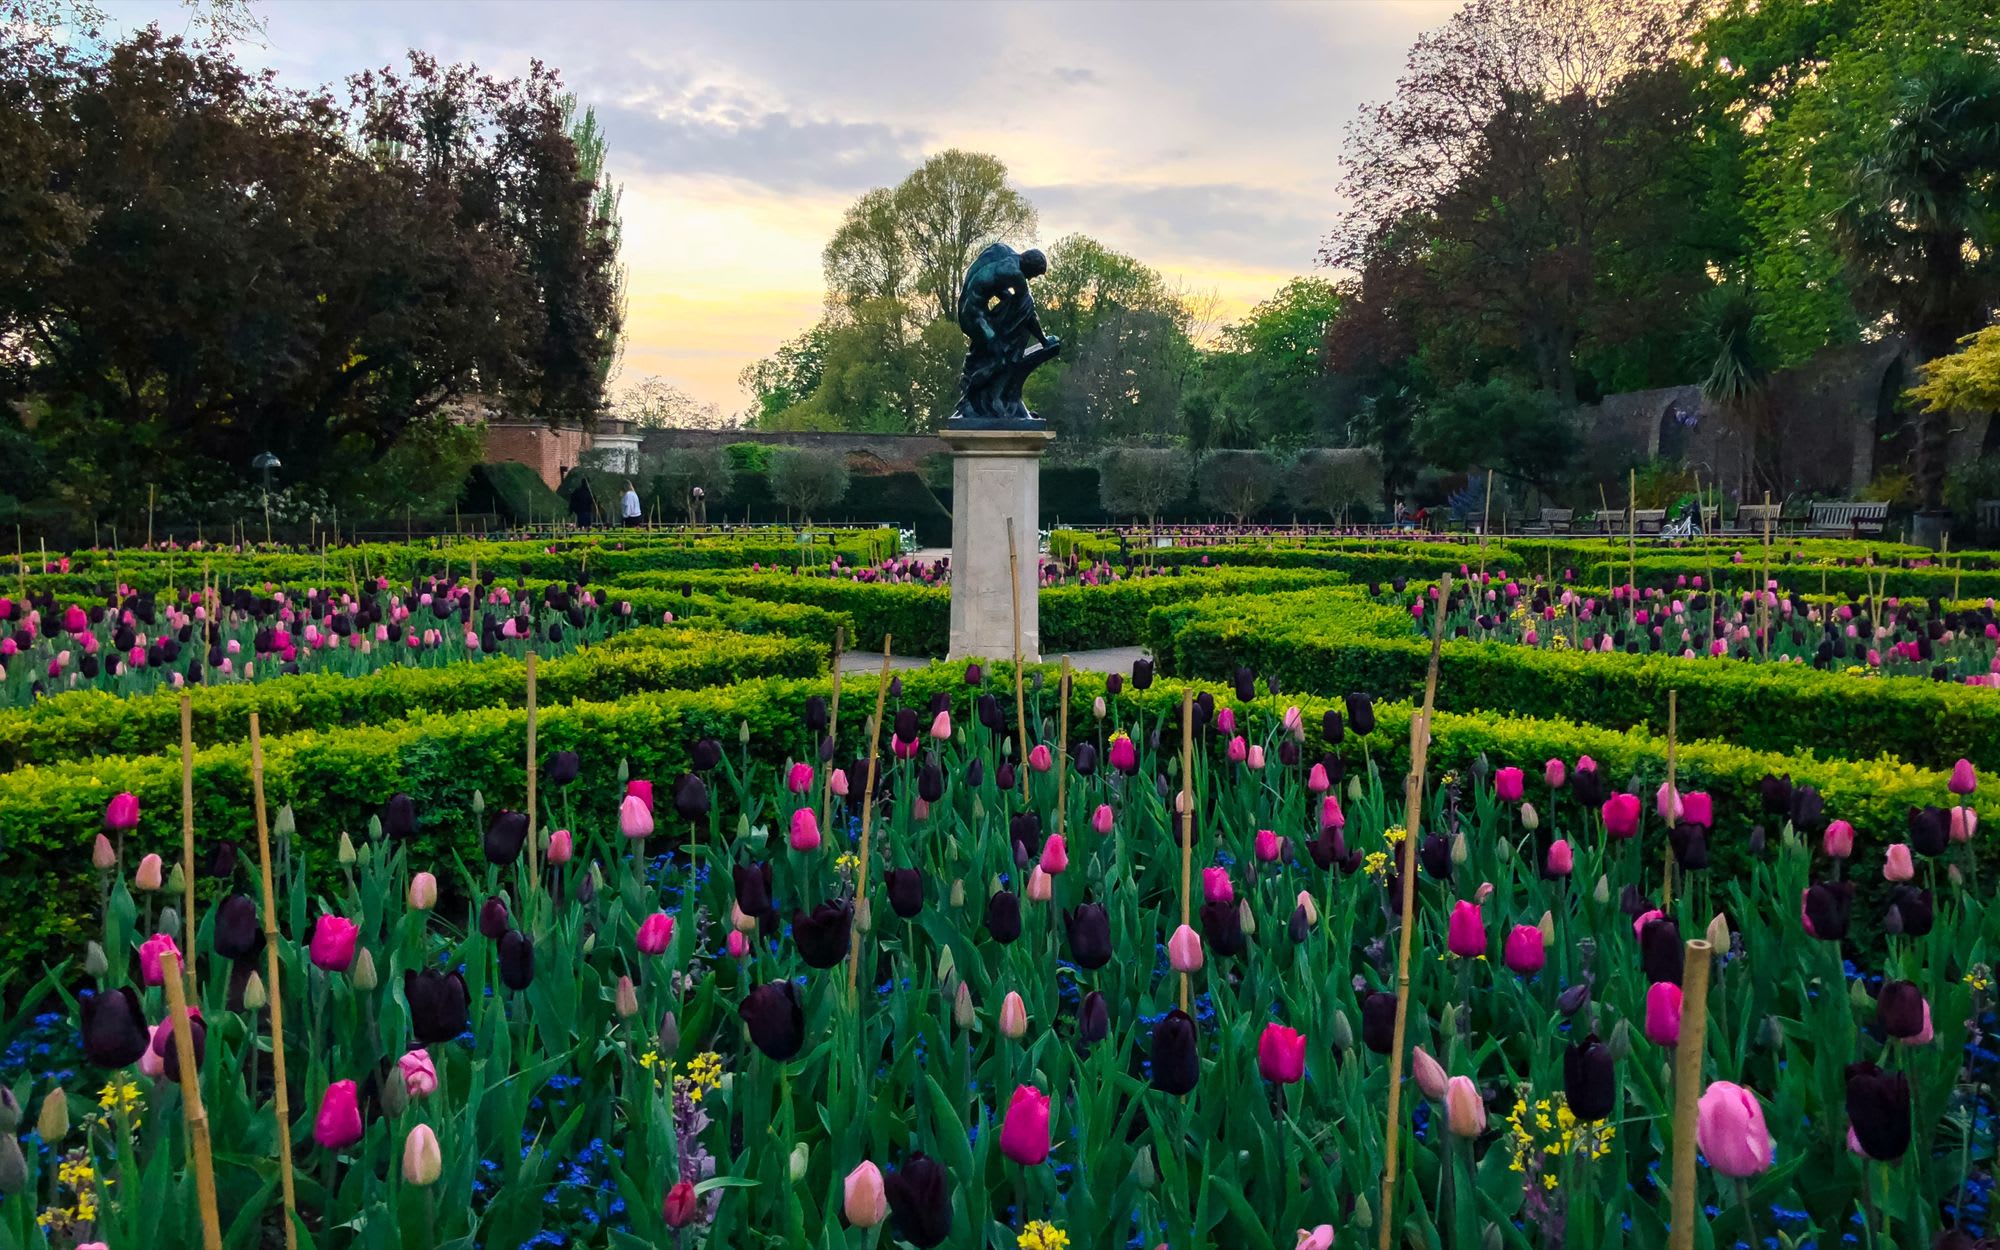 Tulips in bloom in Holland Park, London